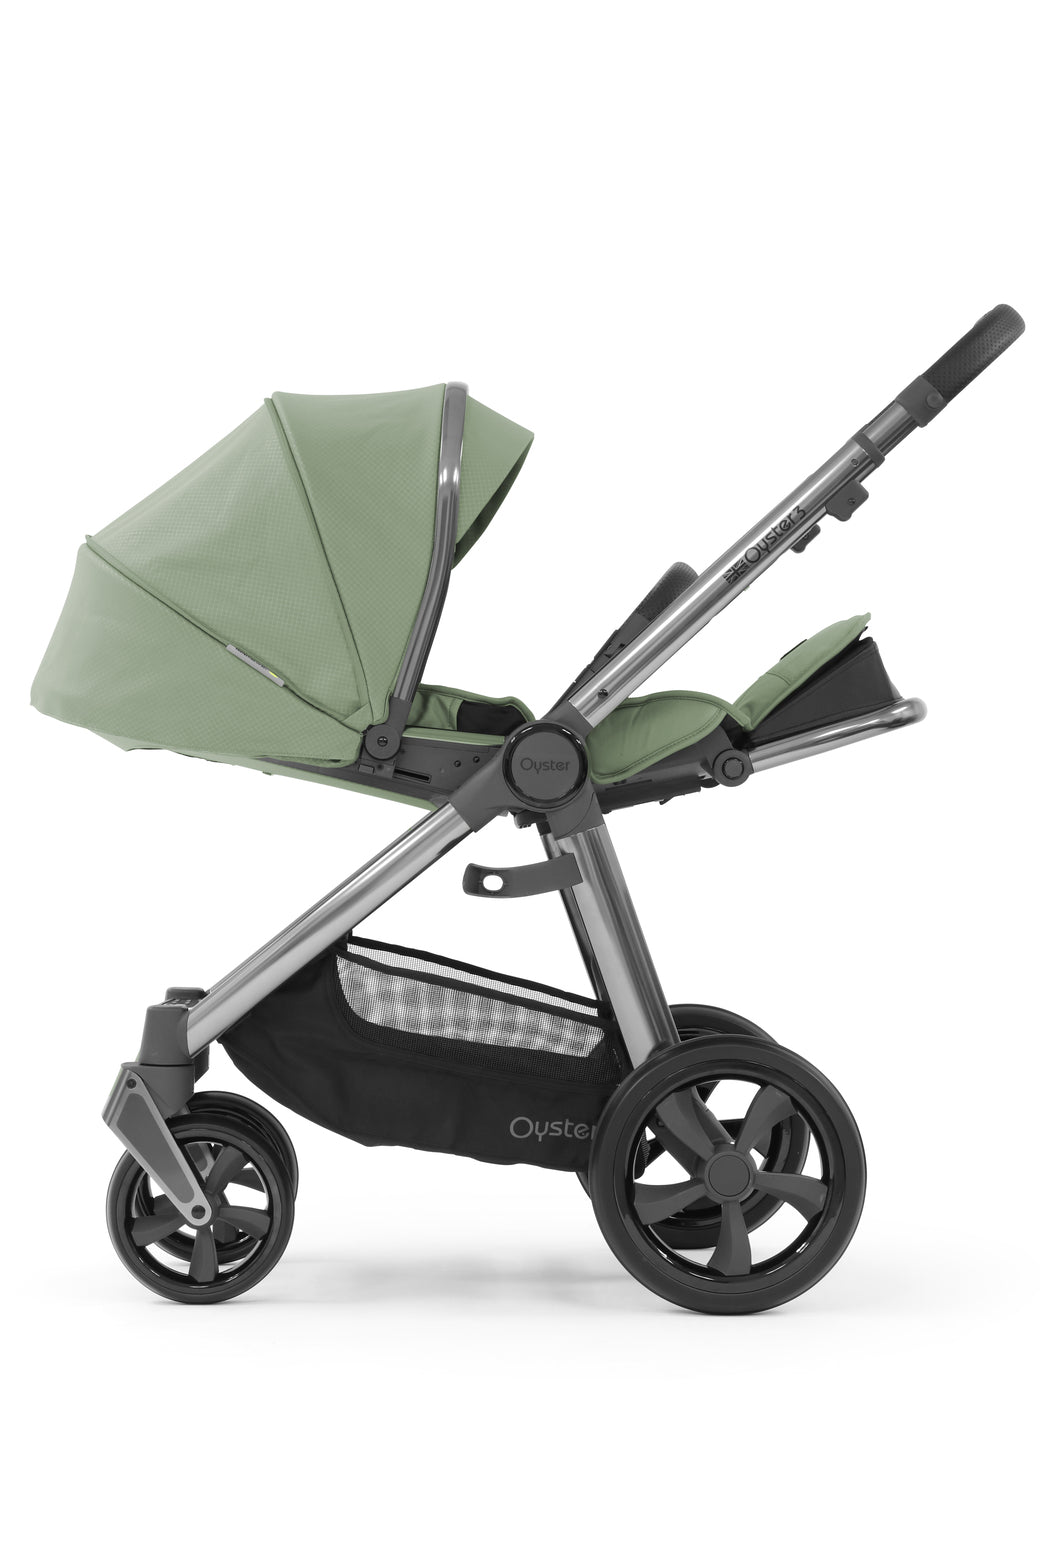 Babystyle Oyster 3 Luxury 7 Piece Travel System Bundle With Cloud T - Spearmint -  | For Your Little One